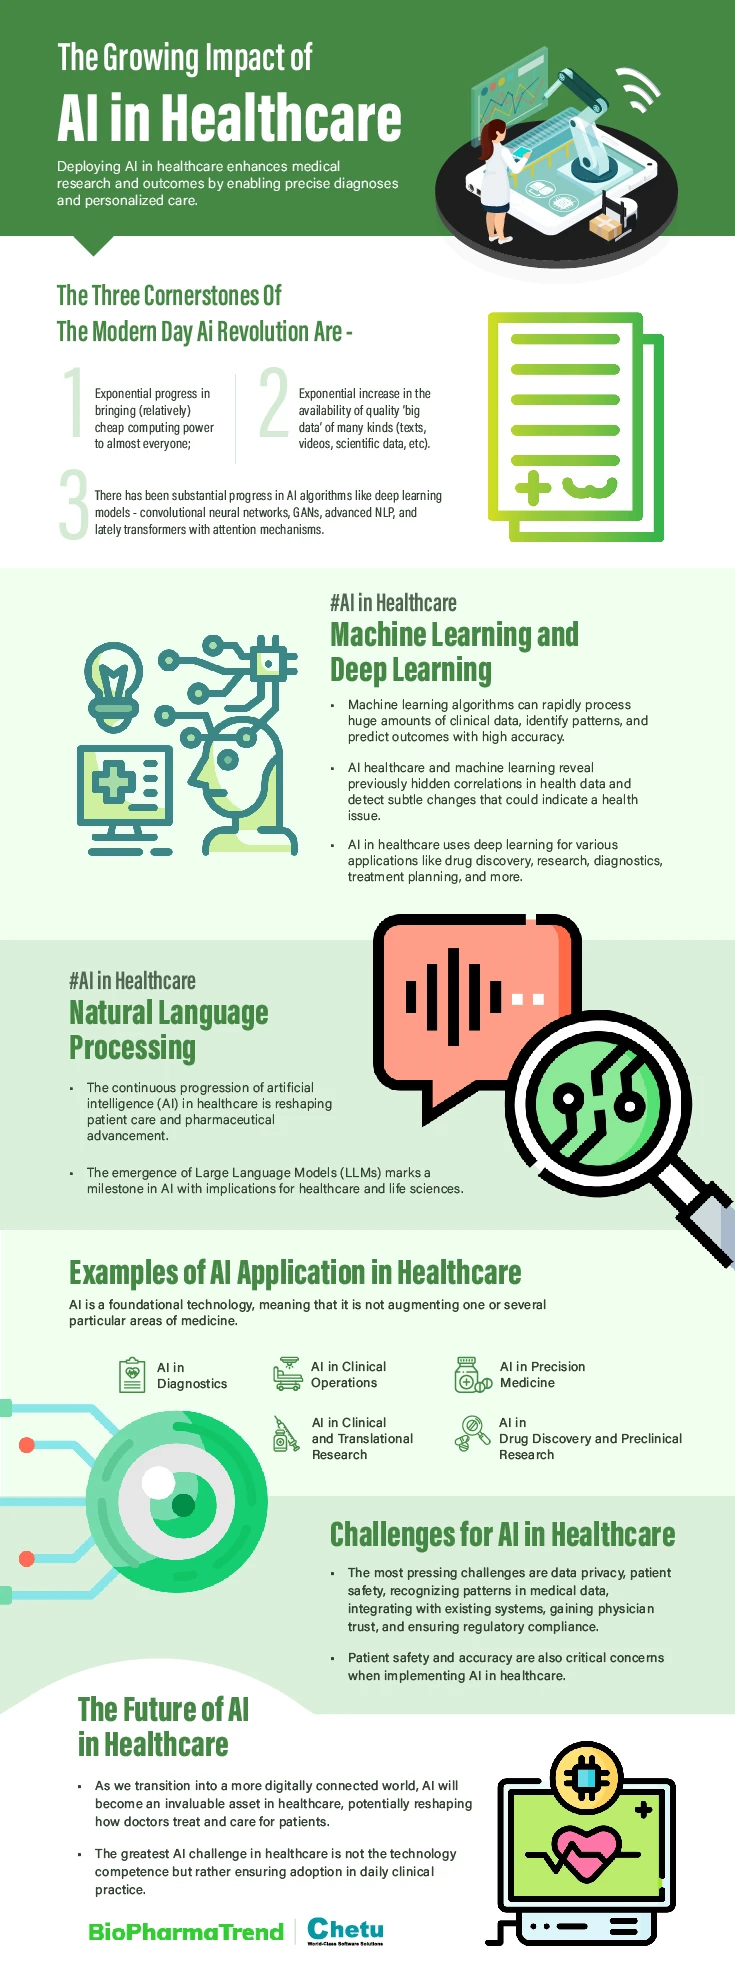 The Growing Impact of AI in Healthcare infographic